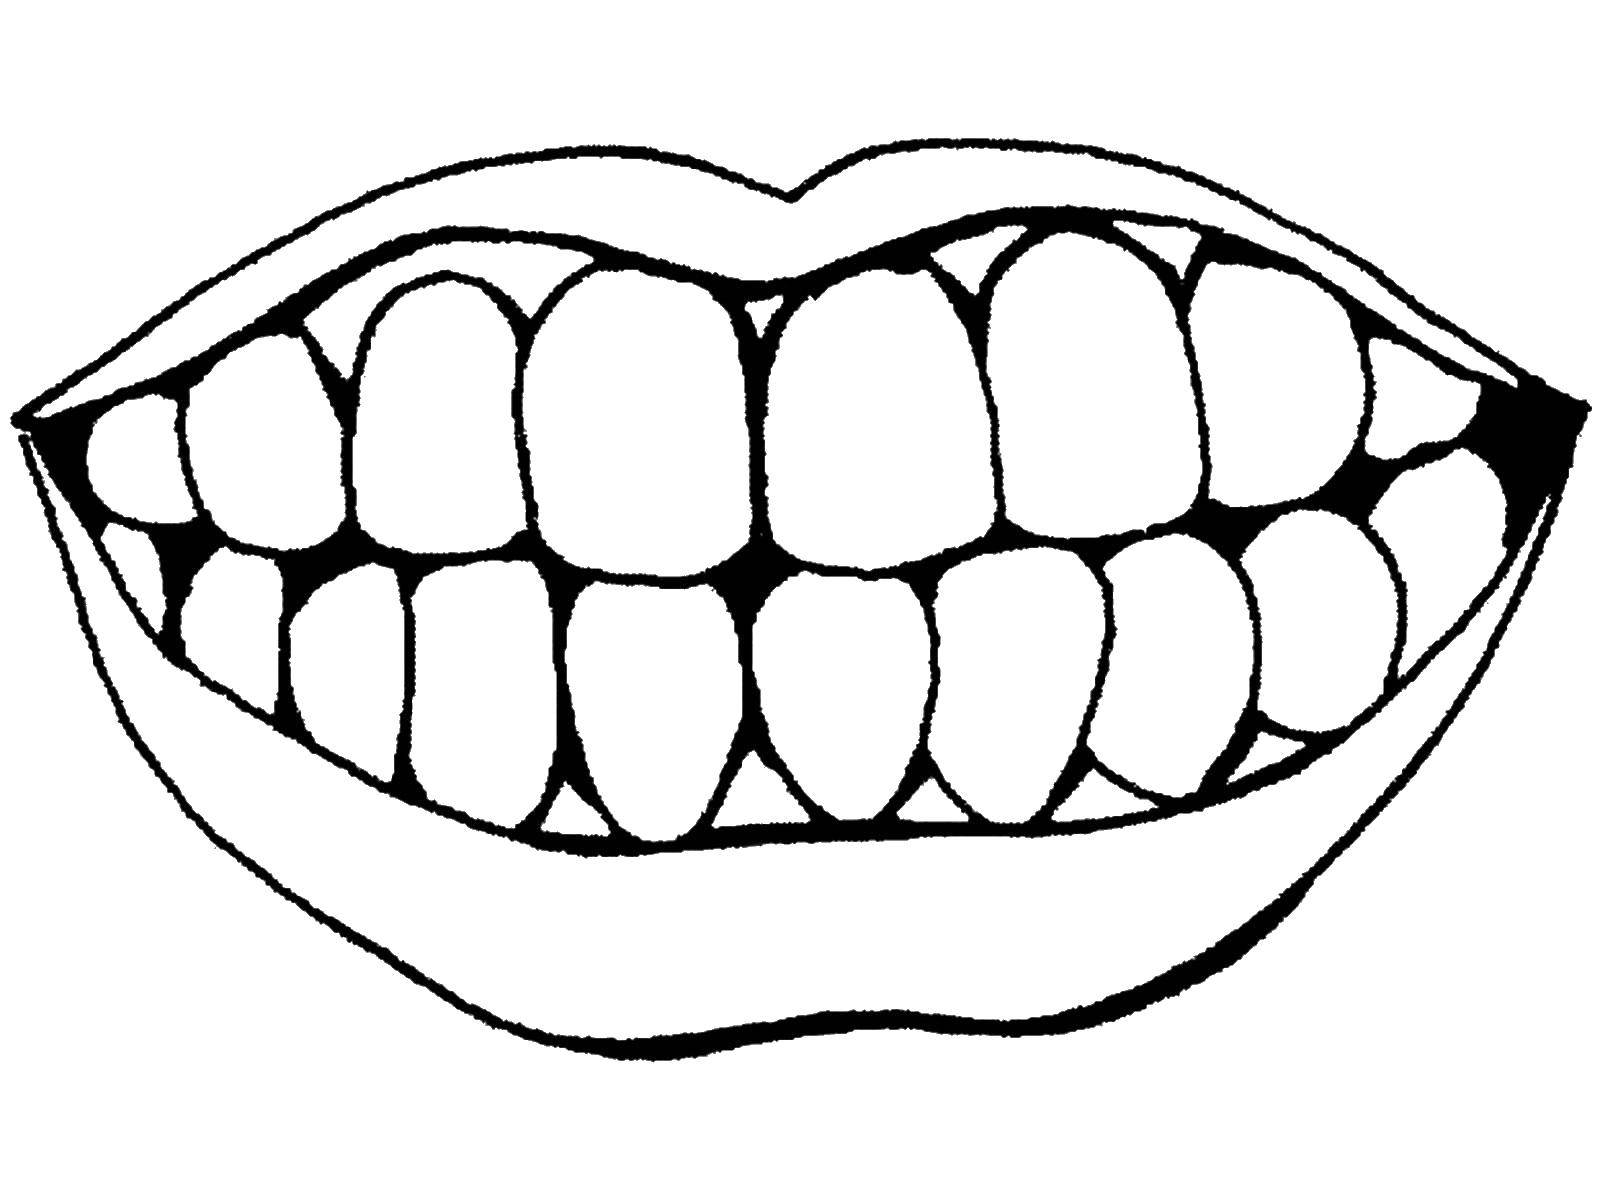 Coloring Teeth and mouth. Category The structure of the body. Tags:  Mouth, teeth.